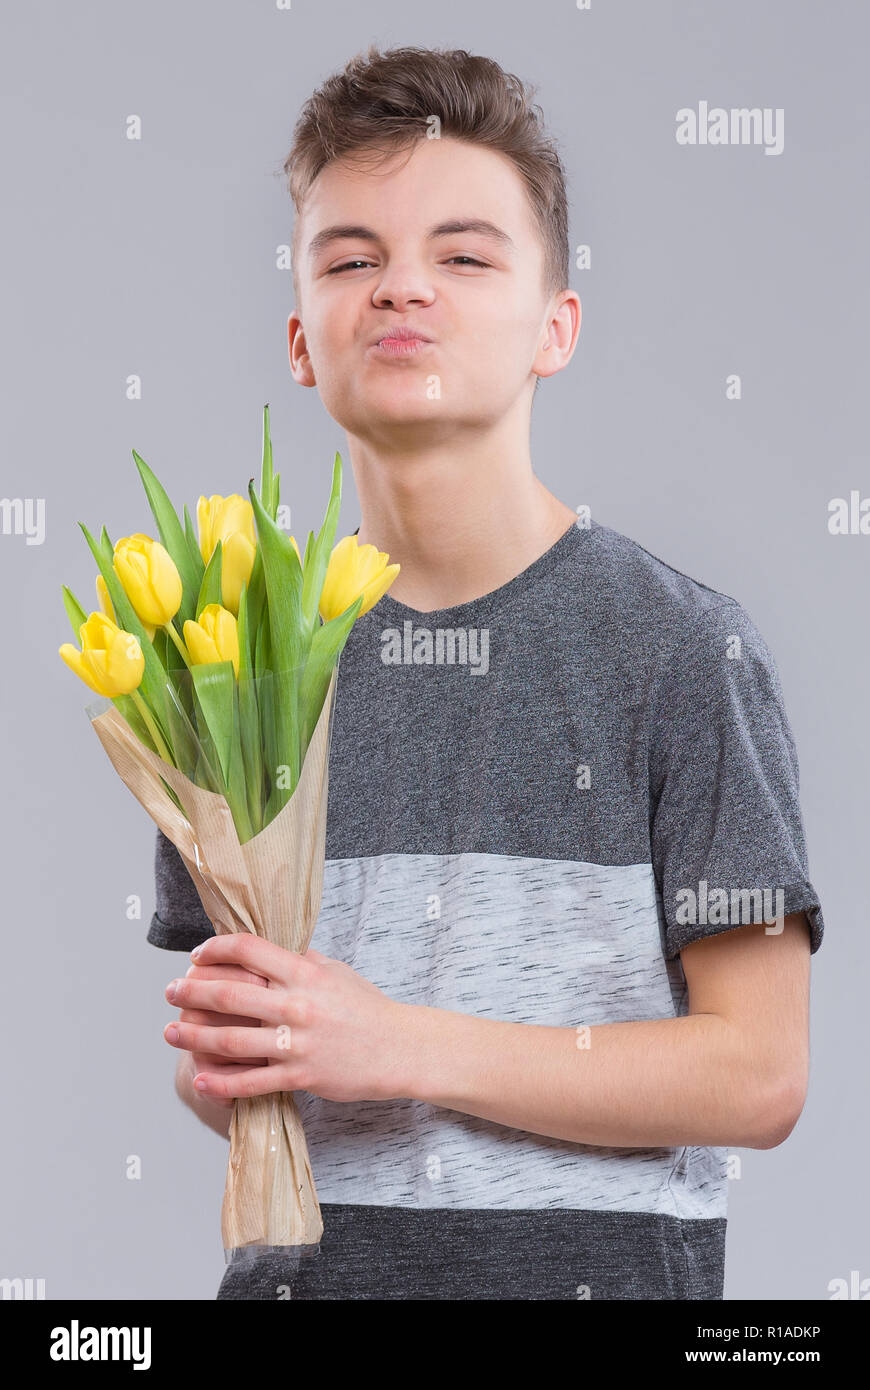 Teen boy with flowers Stock Photo